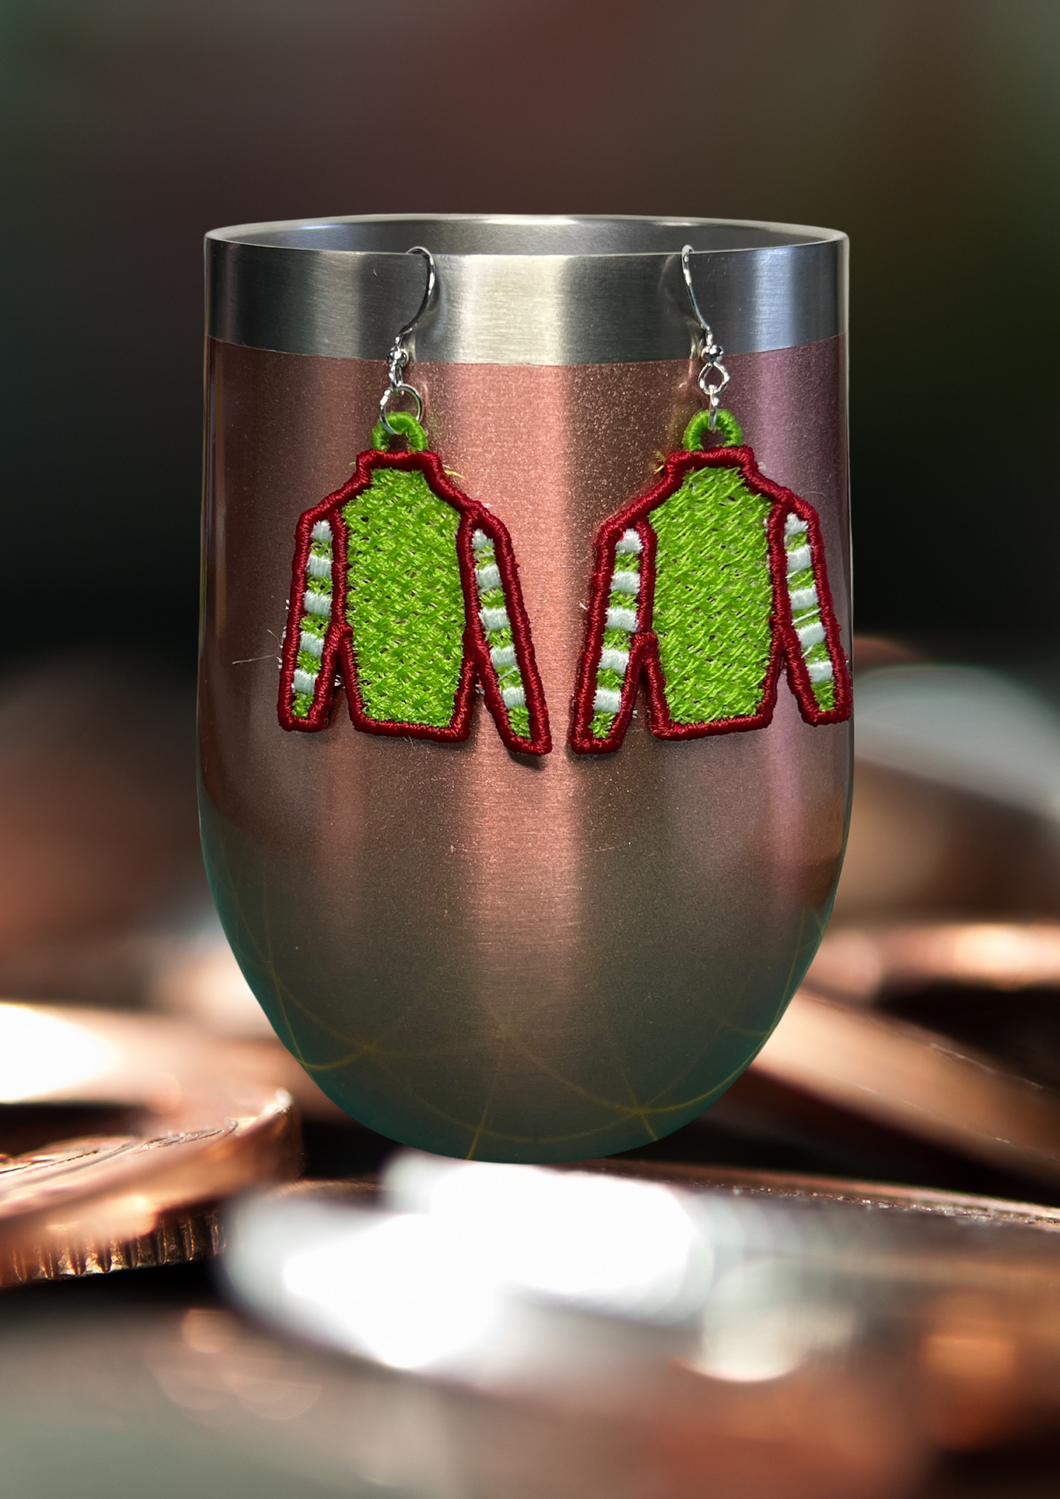 Earrings - Embroidered Jockey Silks, Red and Green